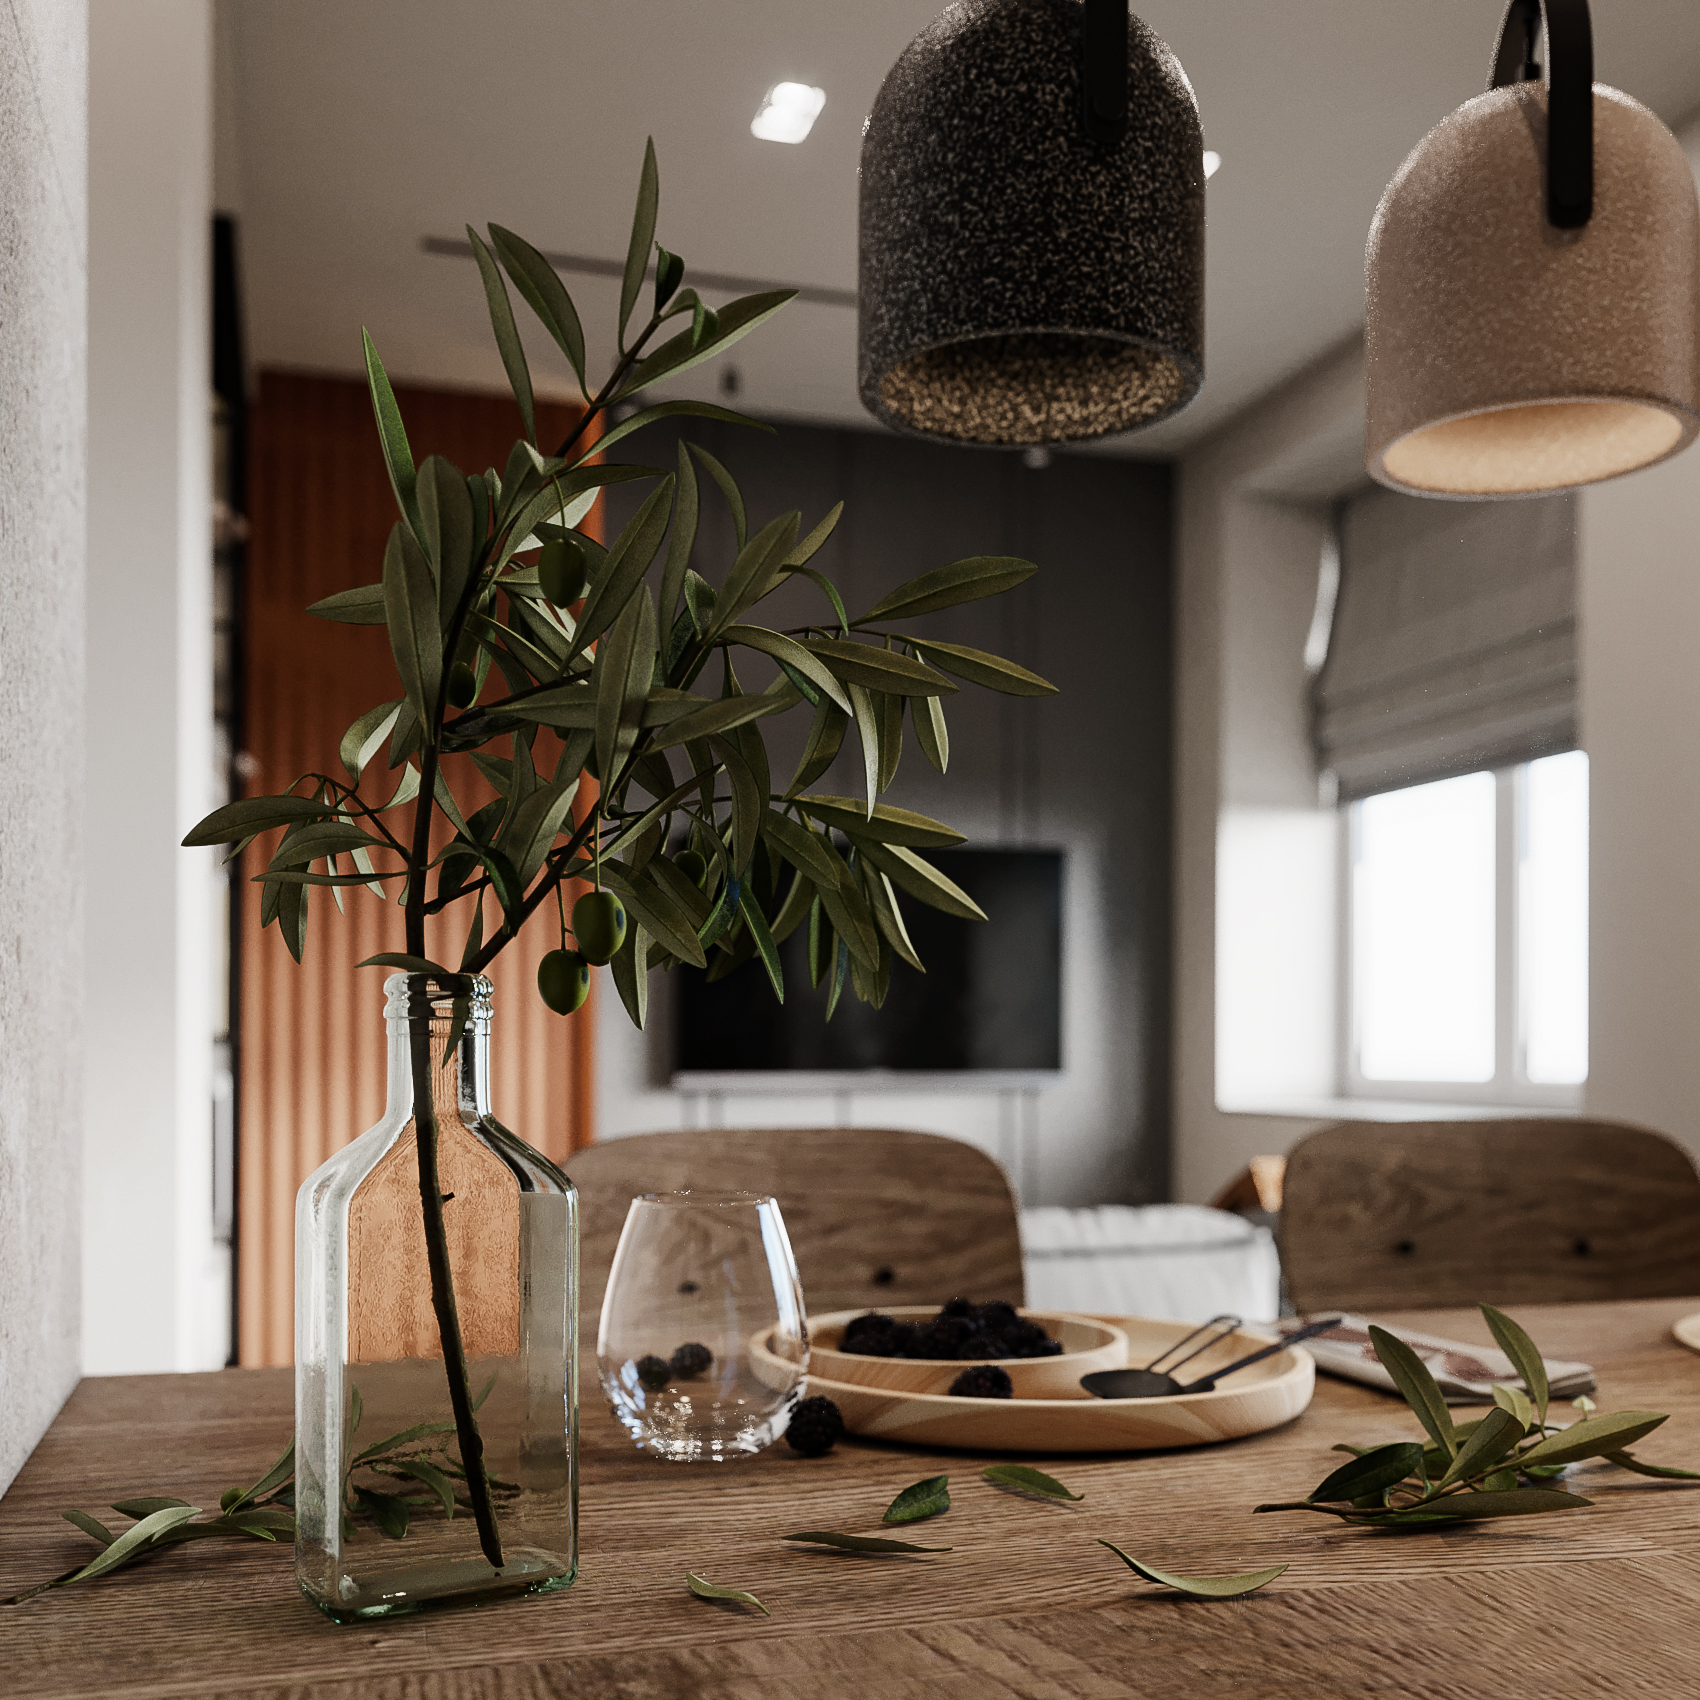 Studio design visualization for a young couple in 3d max corona render image